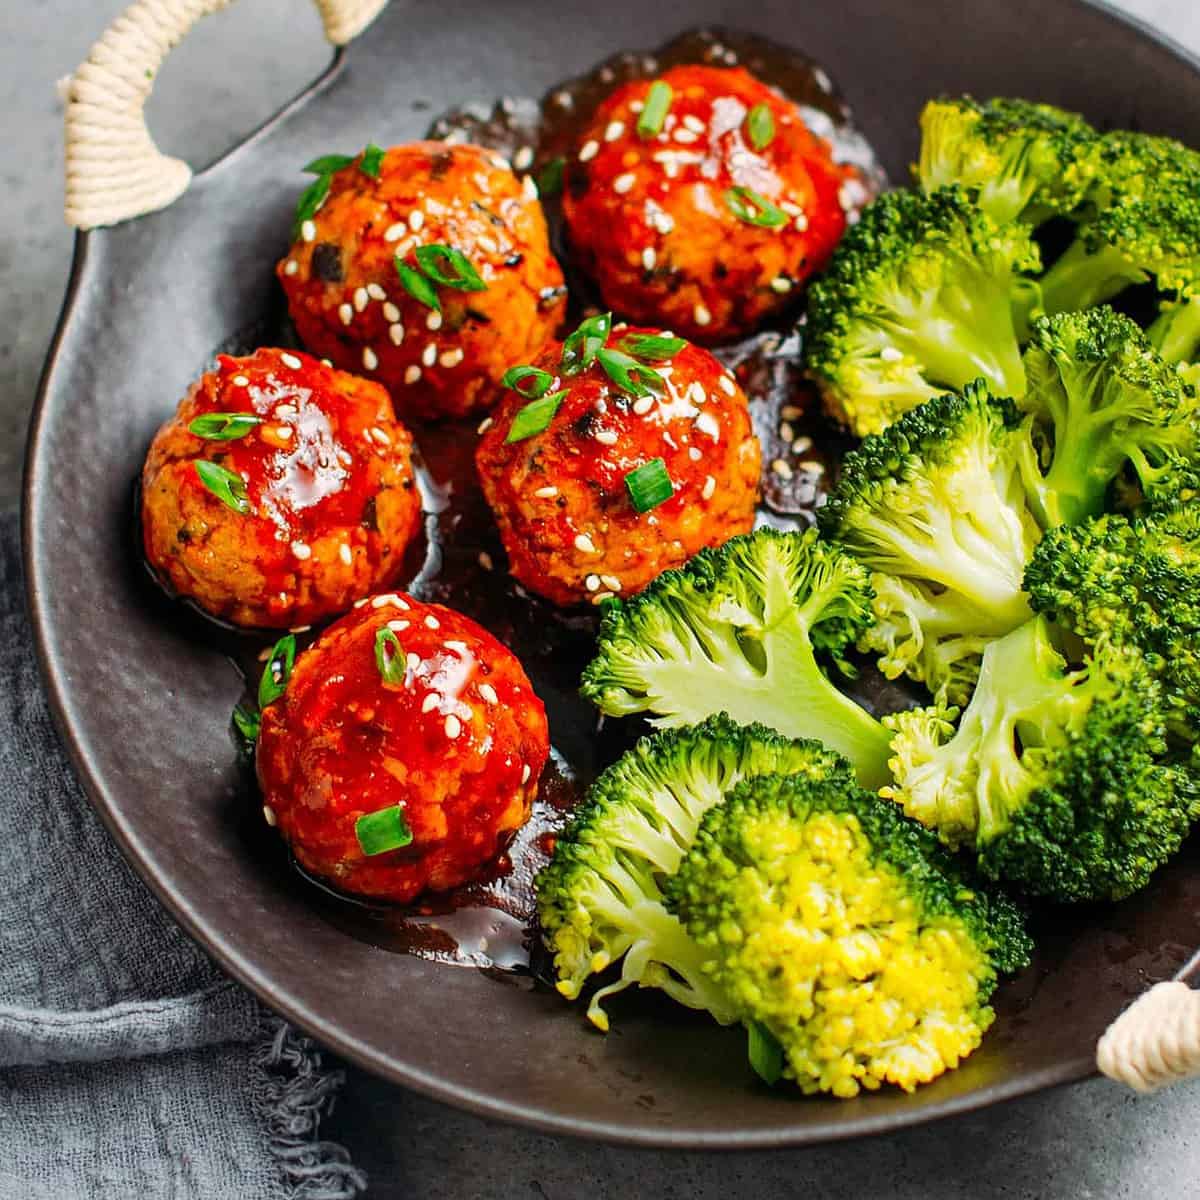  These protein-packed tofu balls will provide you with the energy you need to power through your day.